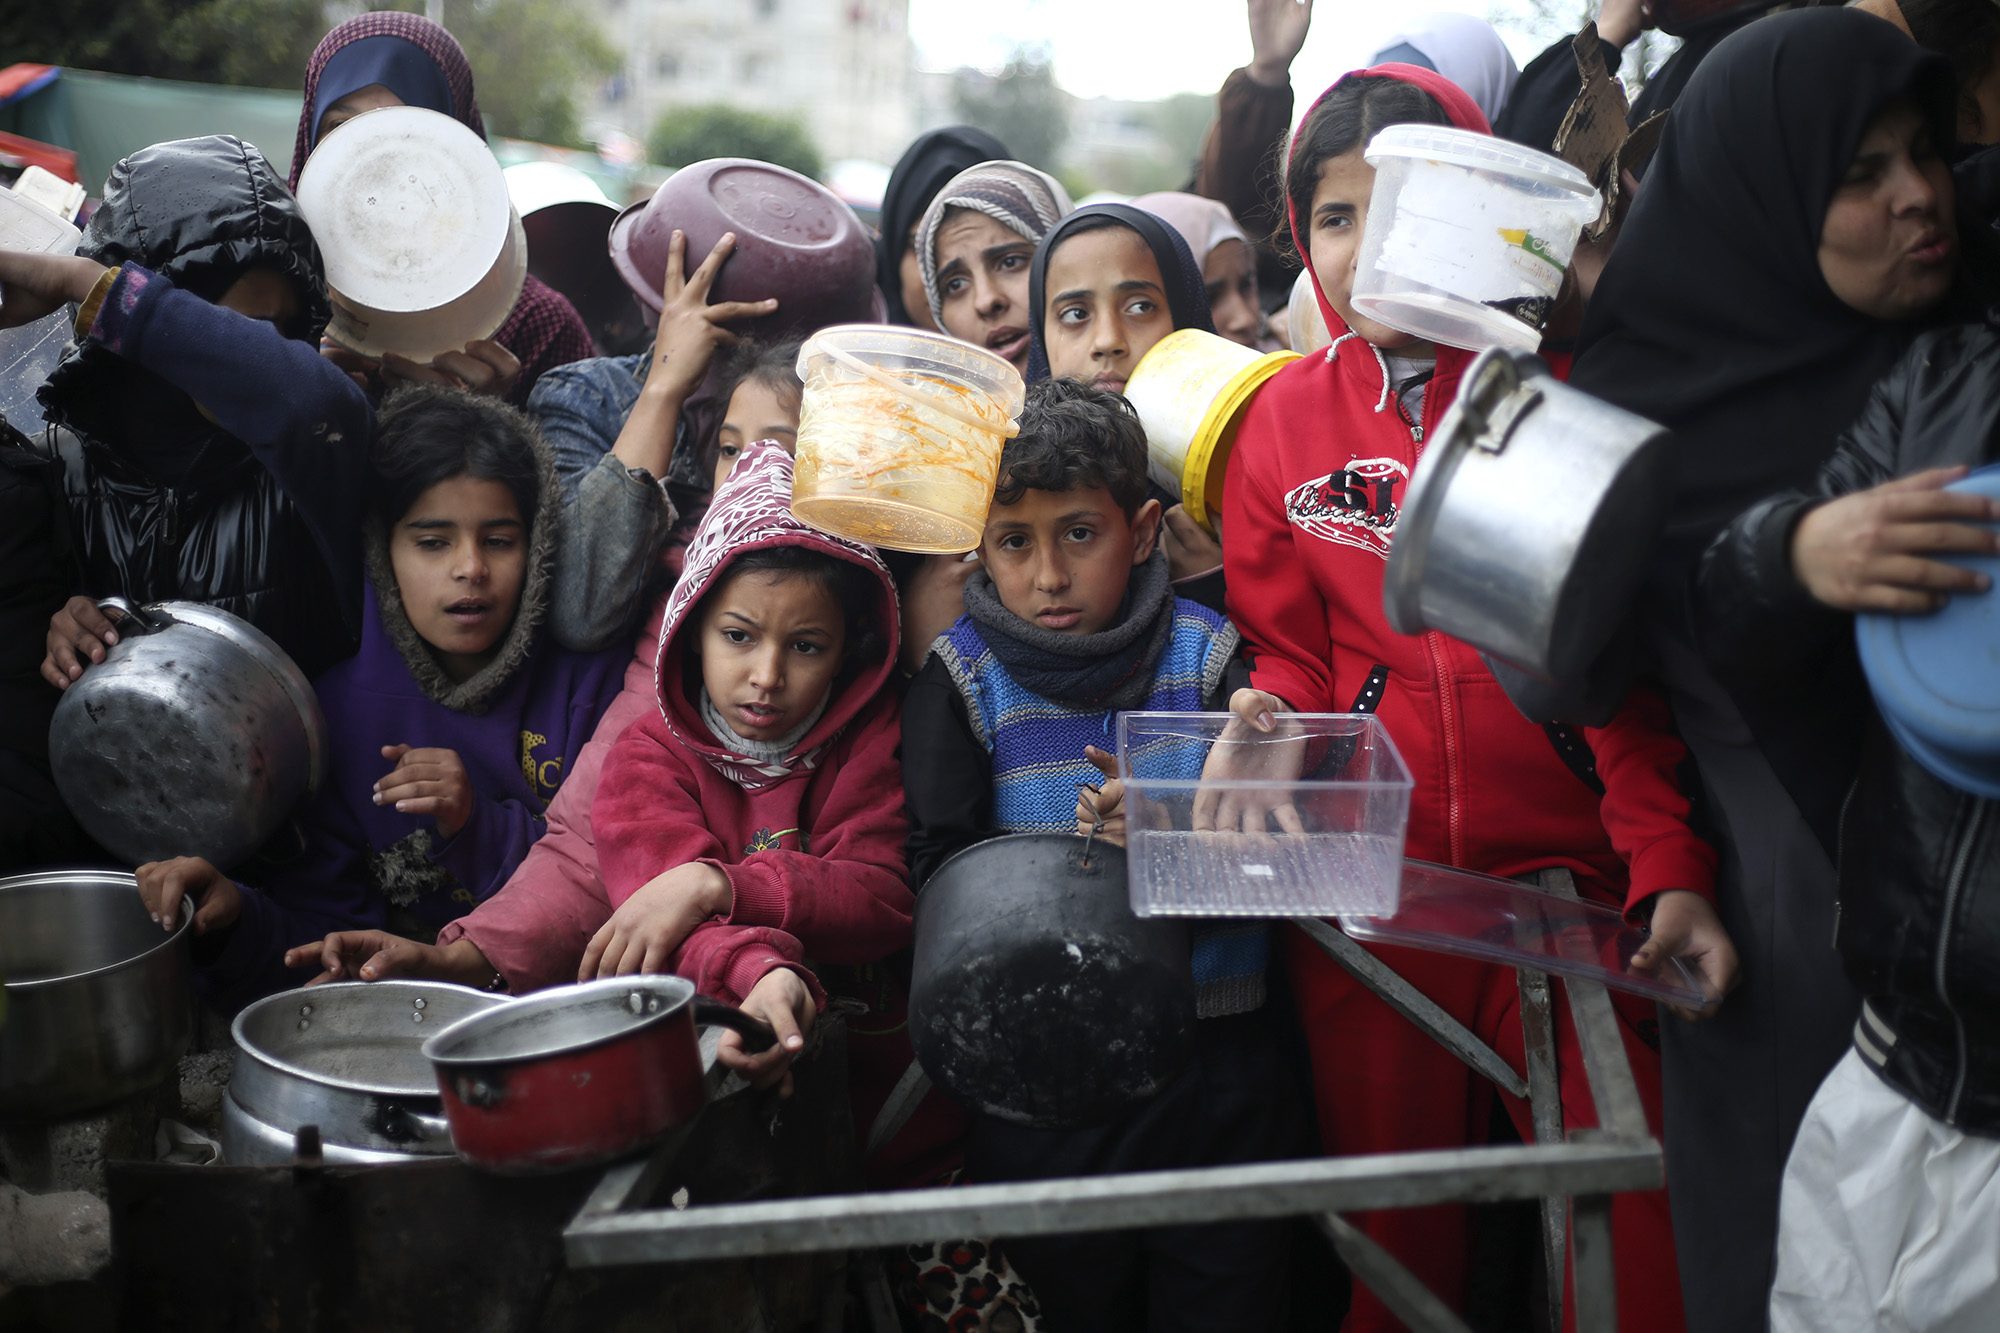 Palestinians line up for food aid in Khan Younis, Gaza, on February 2.